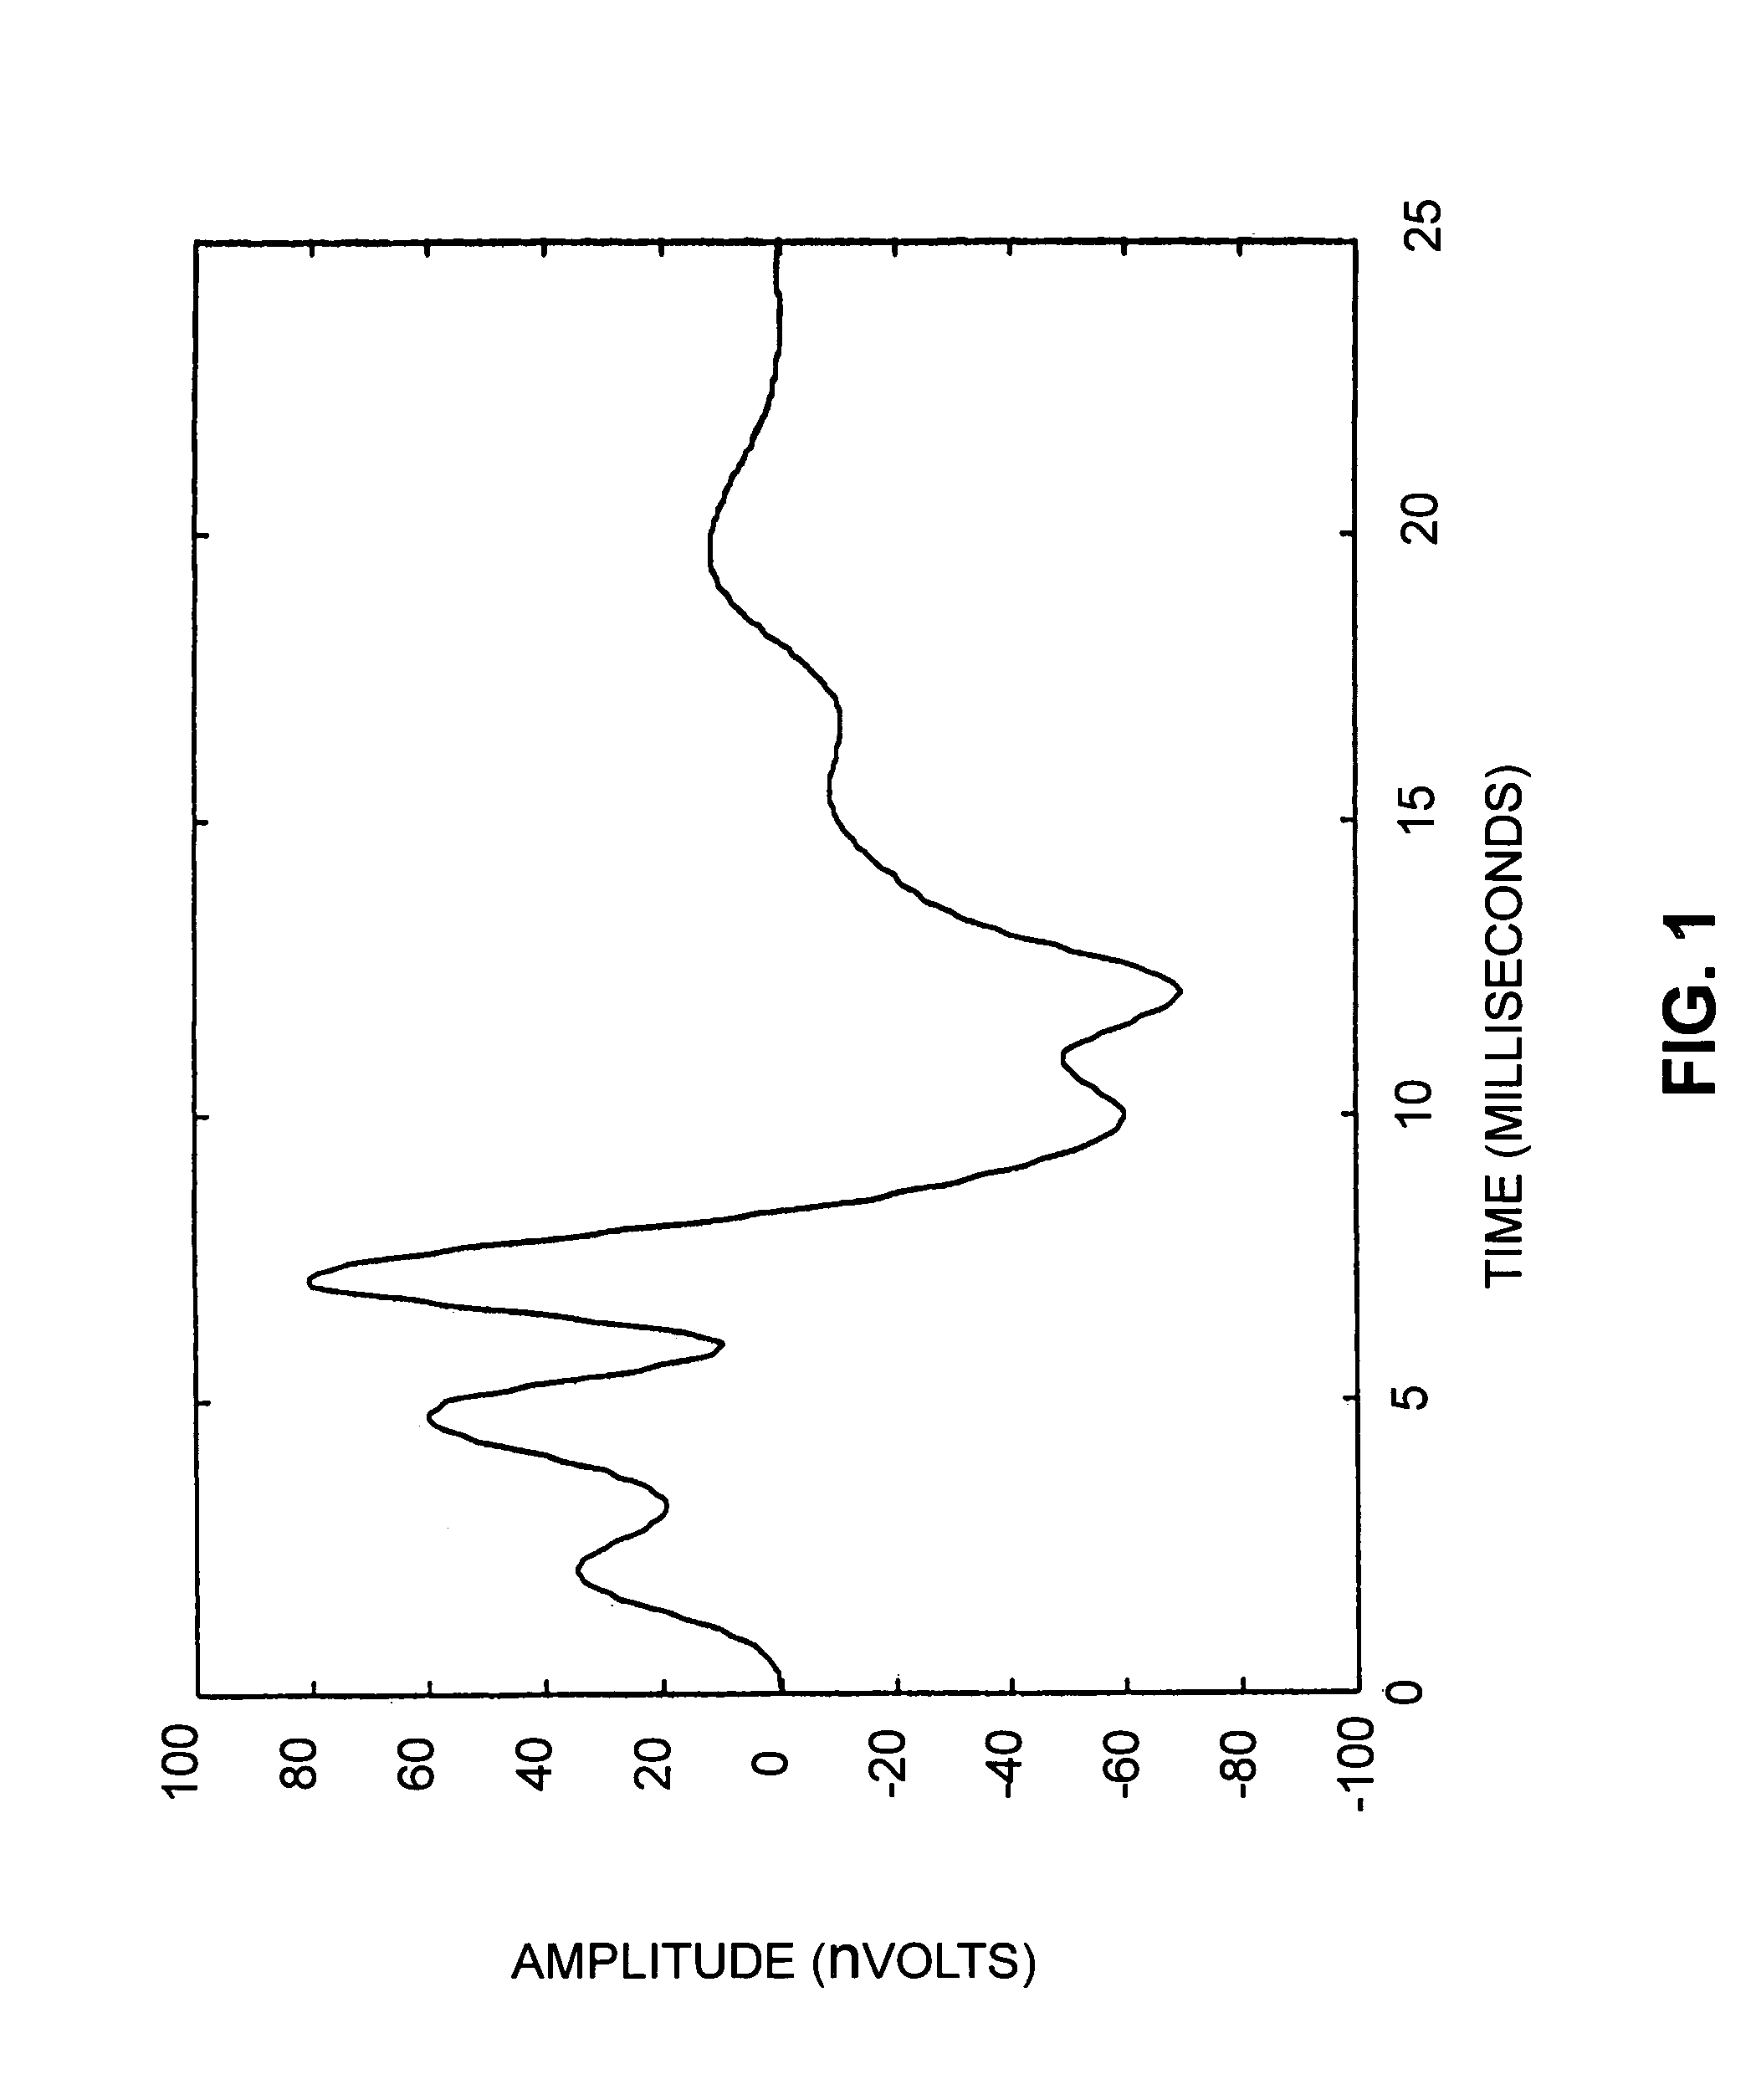 Hearing evaluation device with noise detection and evaluation capability